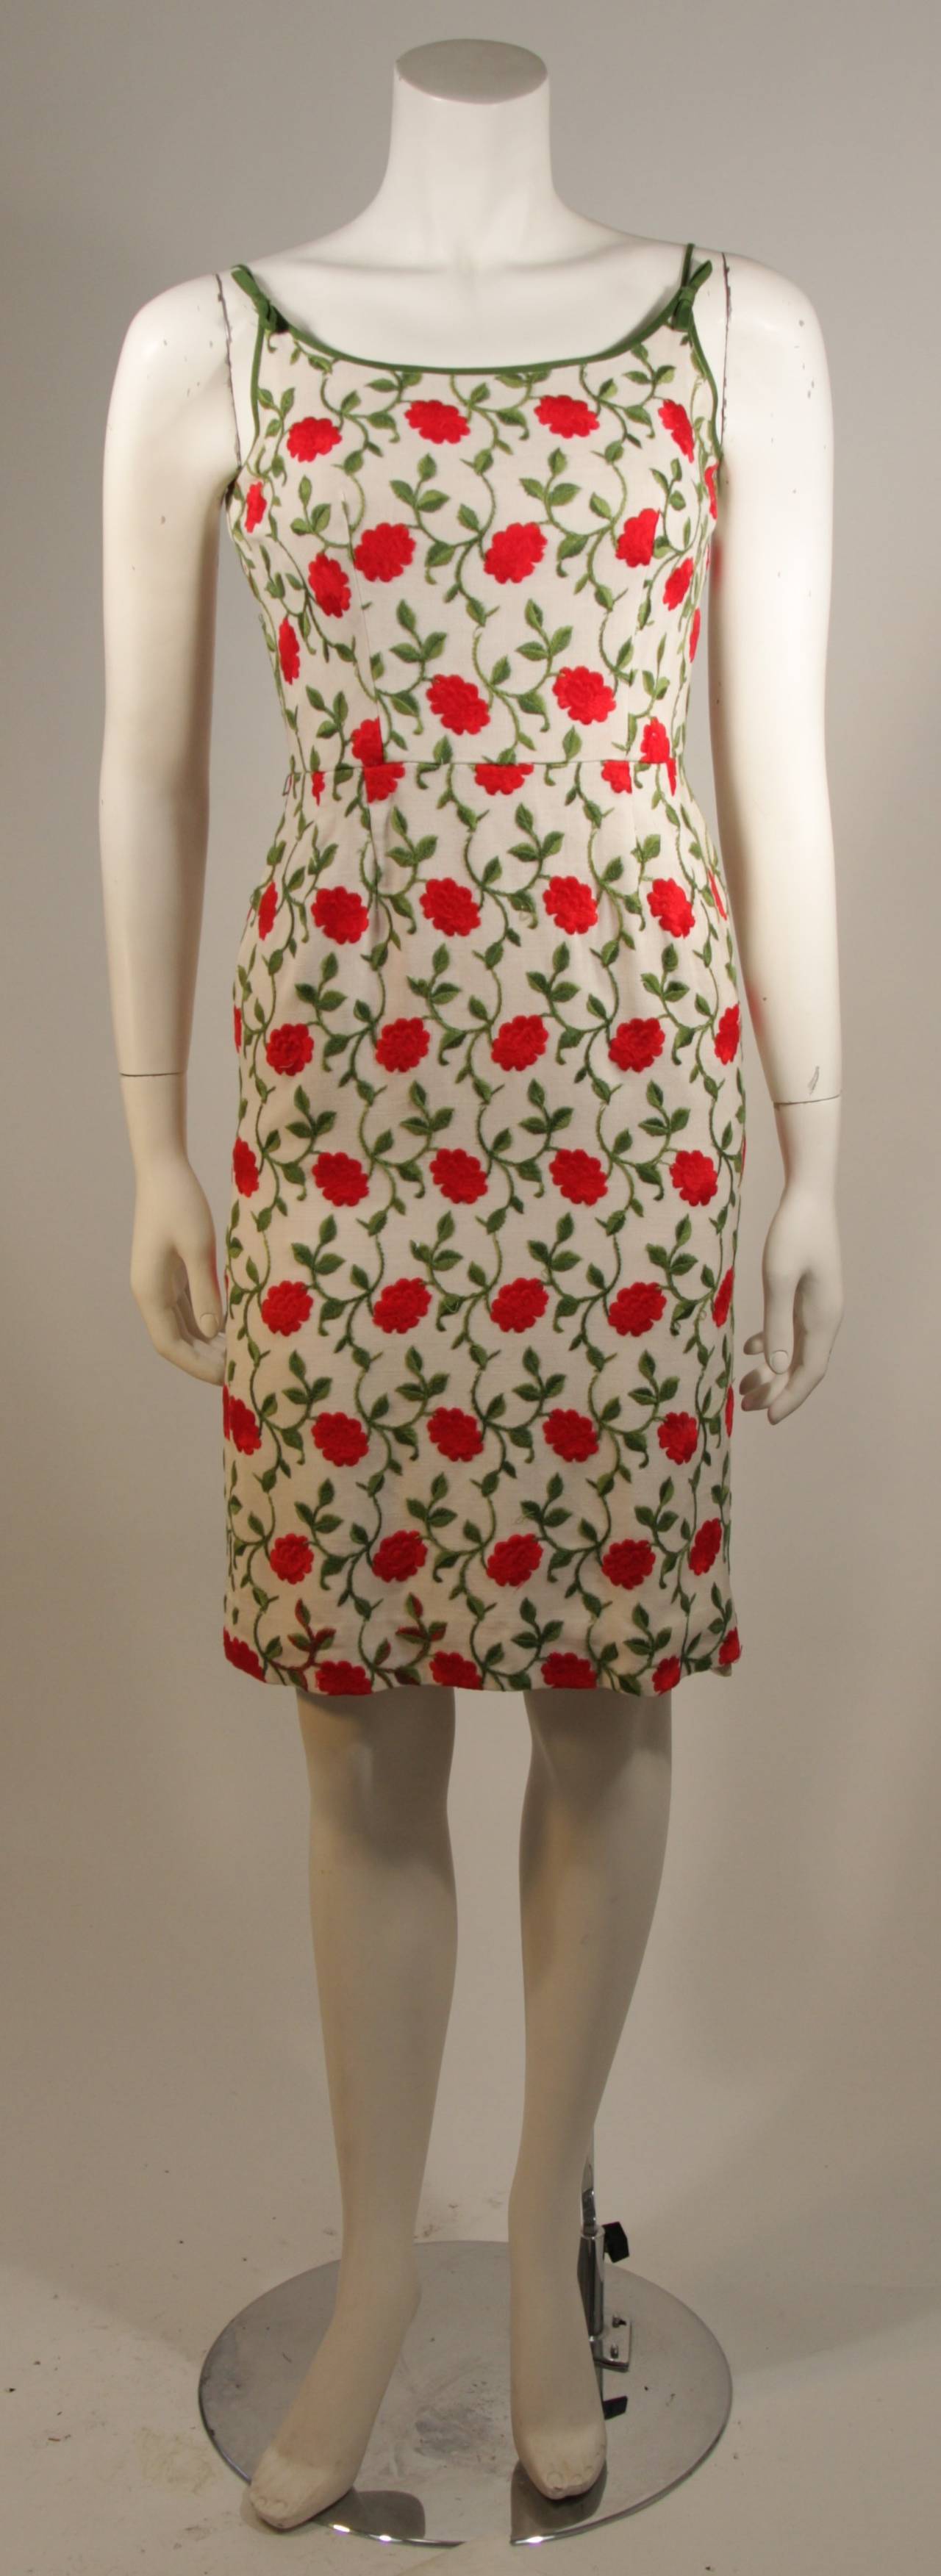 This embroidered cocktail dress is composed of a linen with red flower embroidery. There is a center back zipper for ease of access. The interior seam allowance is experiencing fraying, it is fixable. The dress is absolutely wonderful and features a